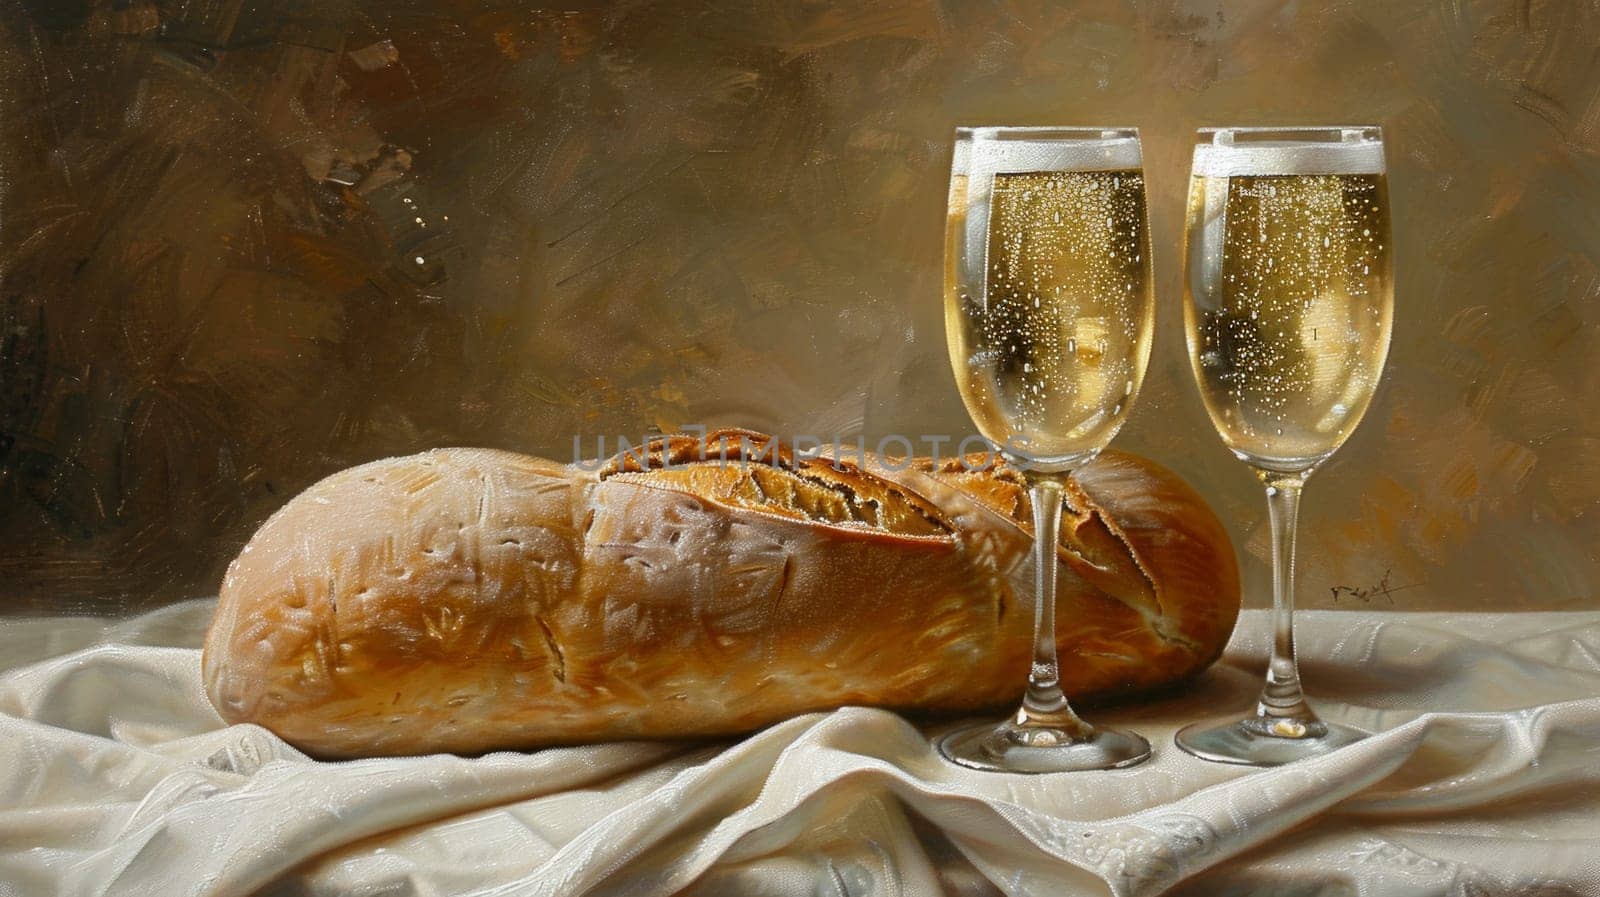 A vibrant painting featuring a freshly baked loaf of bread next to two elegant glasses of champagne. The warm tones of the bread contrast beautifully with the sparkling champagne, creating a unique and appealing composition by but_photo